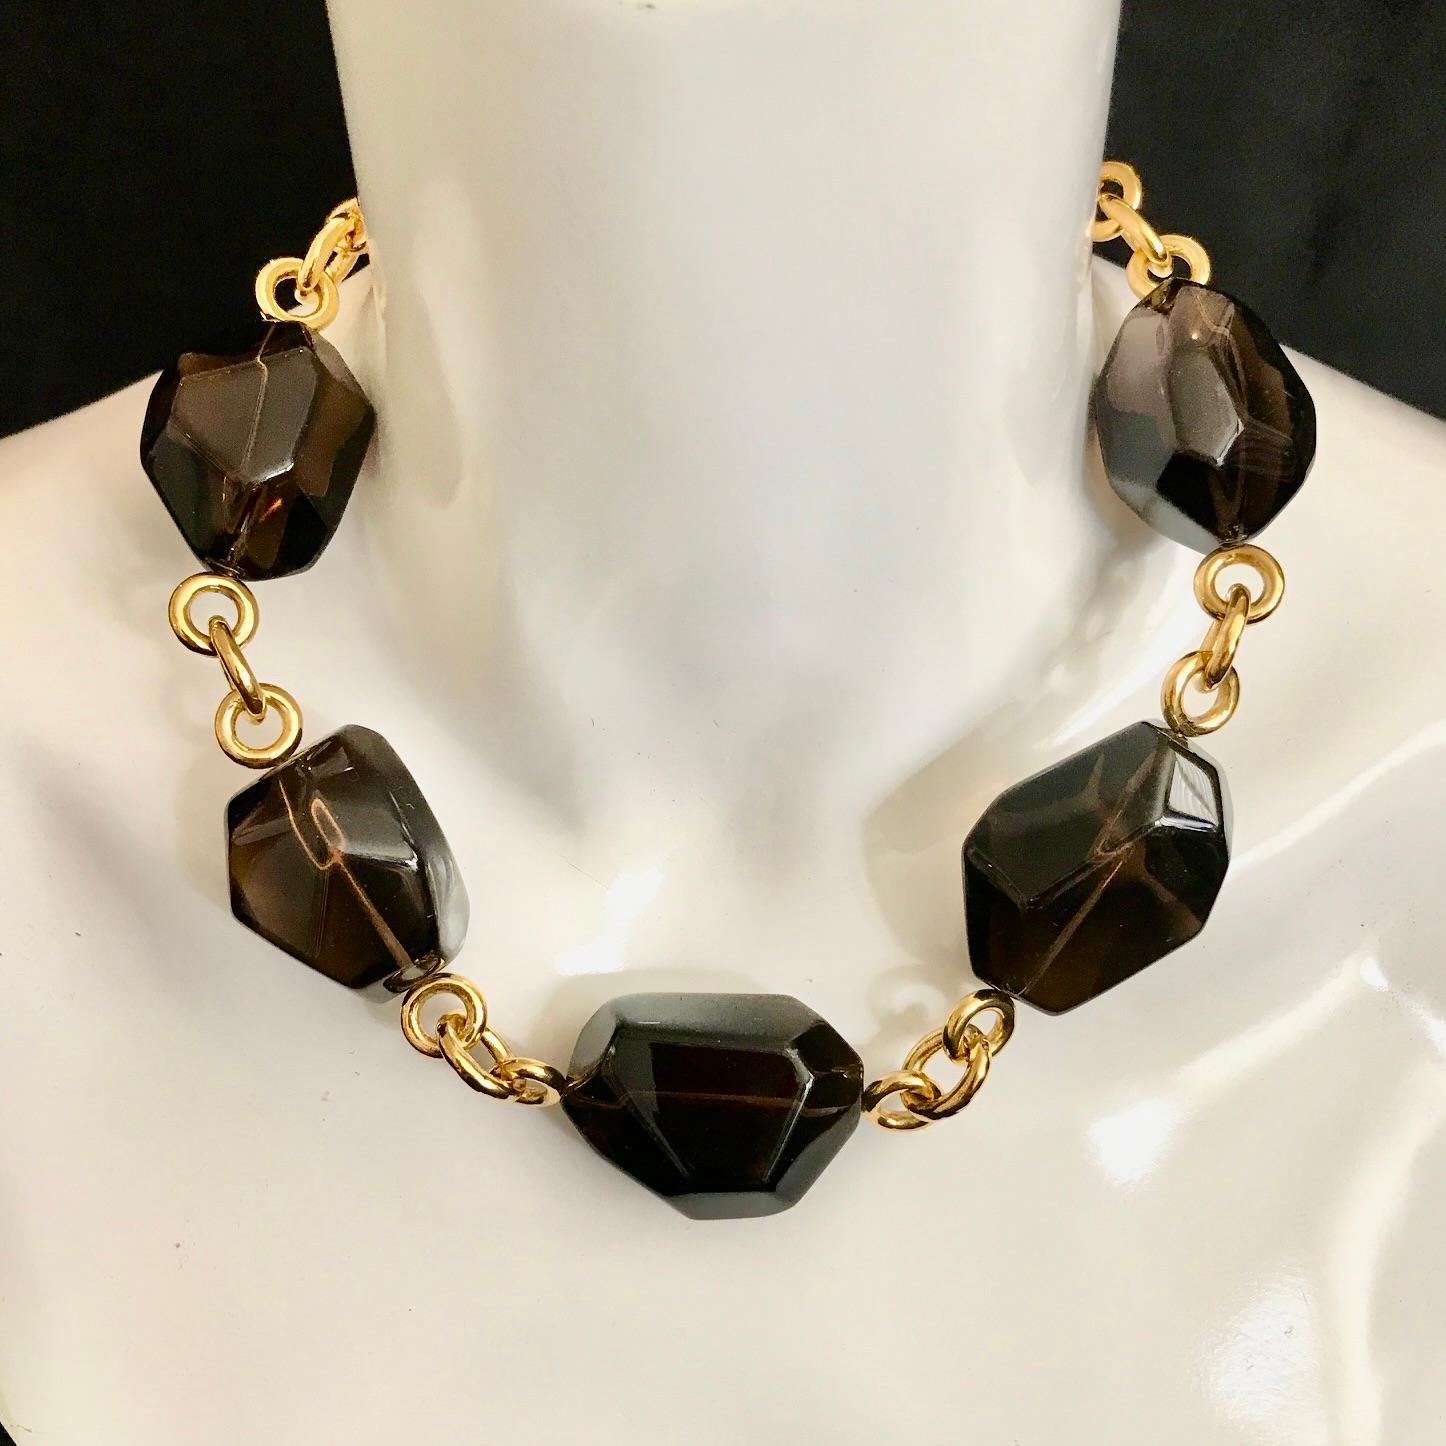 Formed of 5 wonderfully large & lustrous faceted tumbled Smokey Quartz gemstones separated by chunky 'fancy link' connectors & ending in a toggle clasp, this is a bold yet stylishly elegant necklace guaranteed to turn heads. 

The stones measure